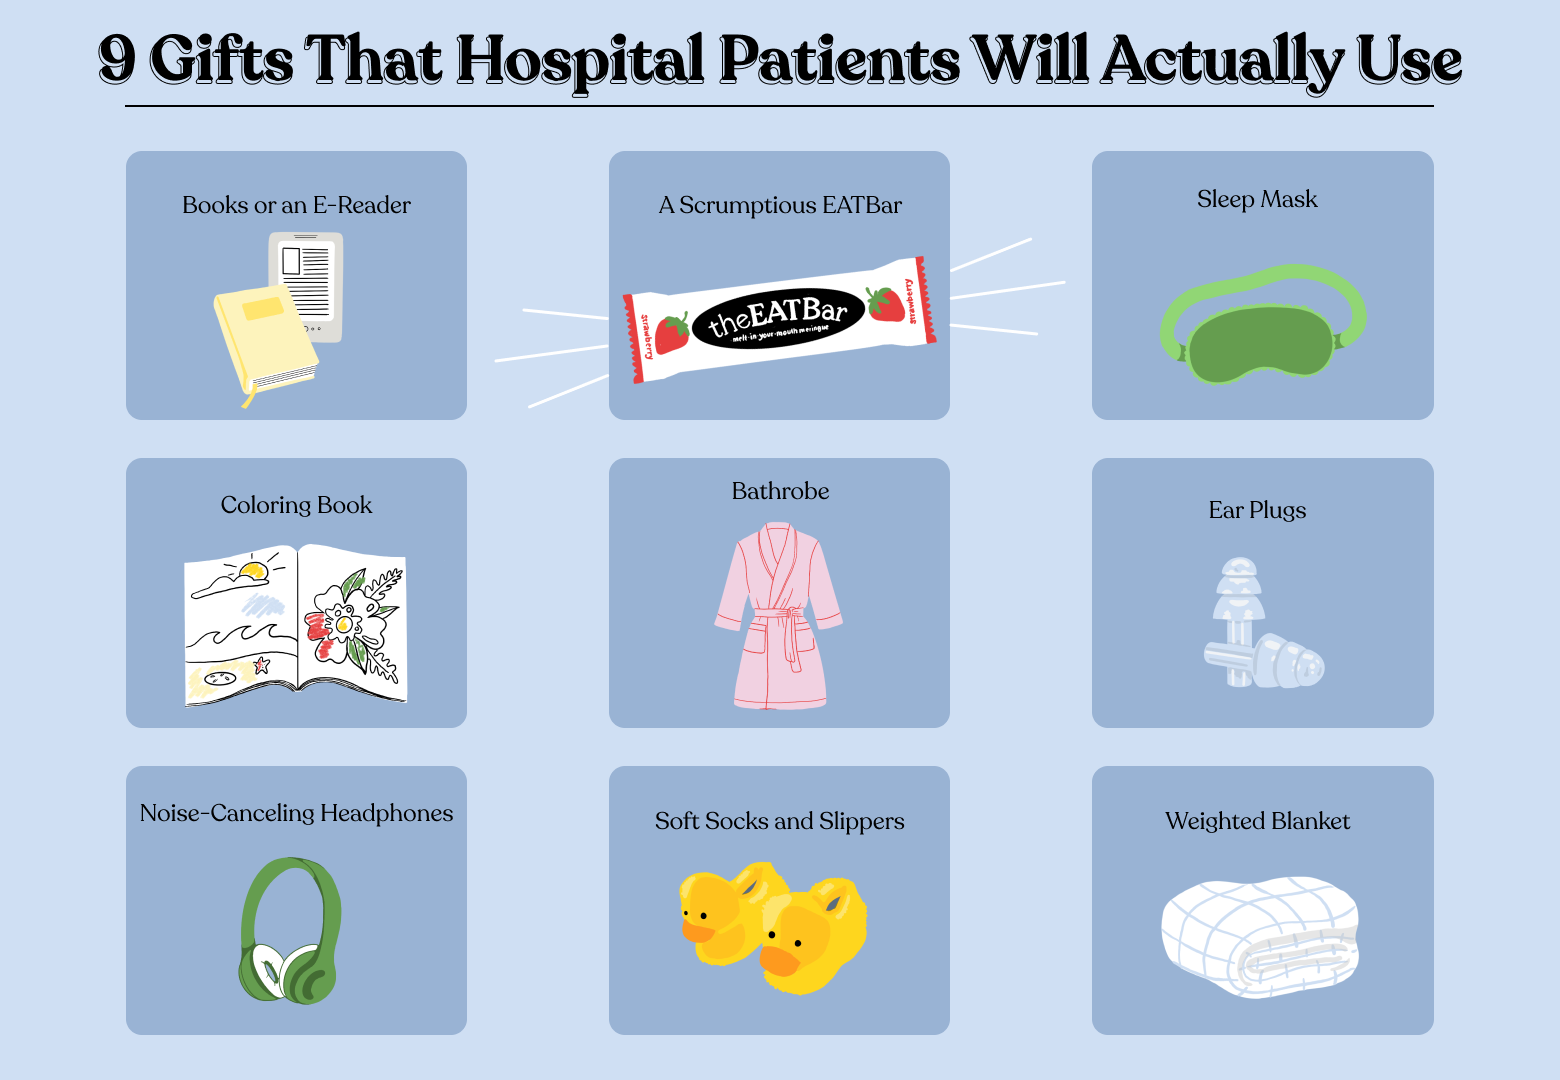 9 Gifts That Hospital Patients Will Actually Use